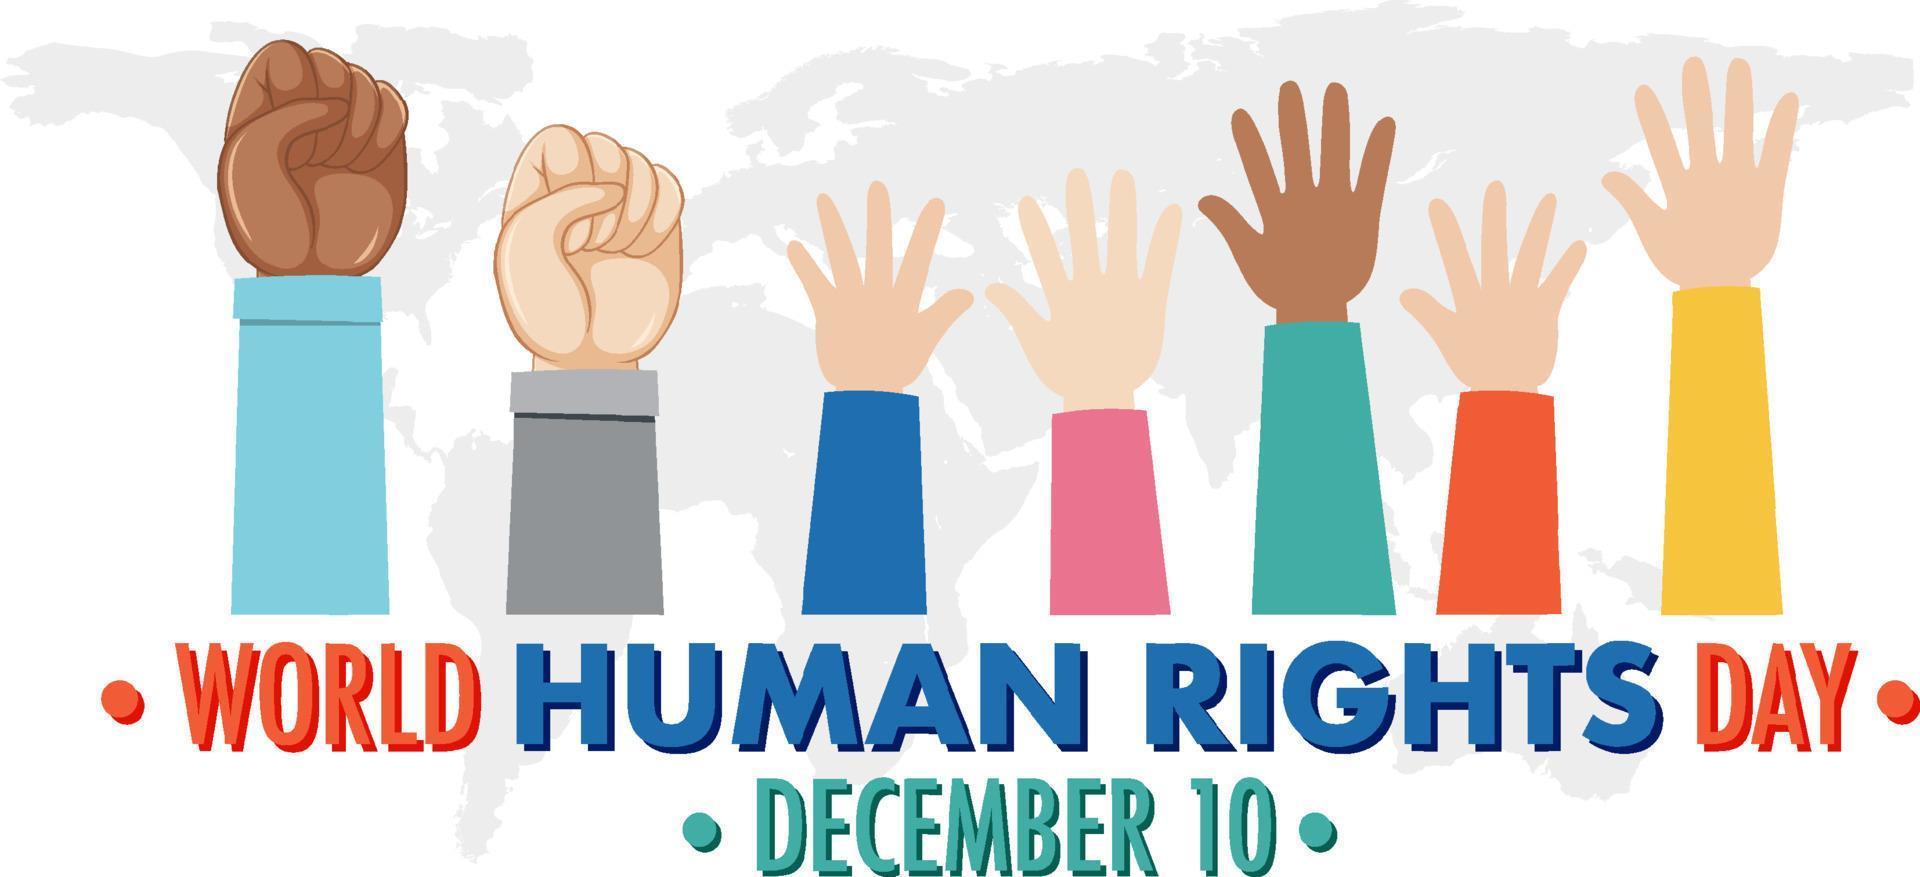 World Human Rights Day Poster Design vector